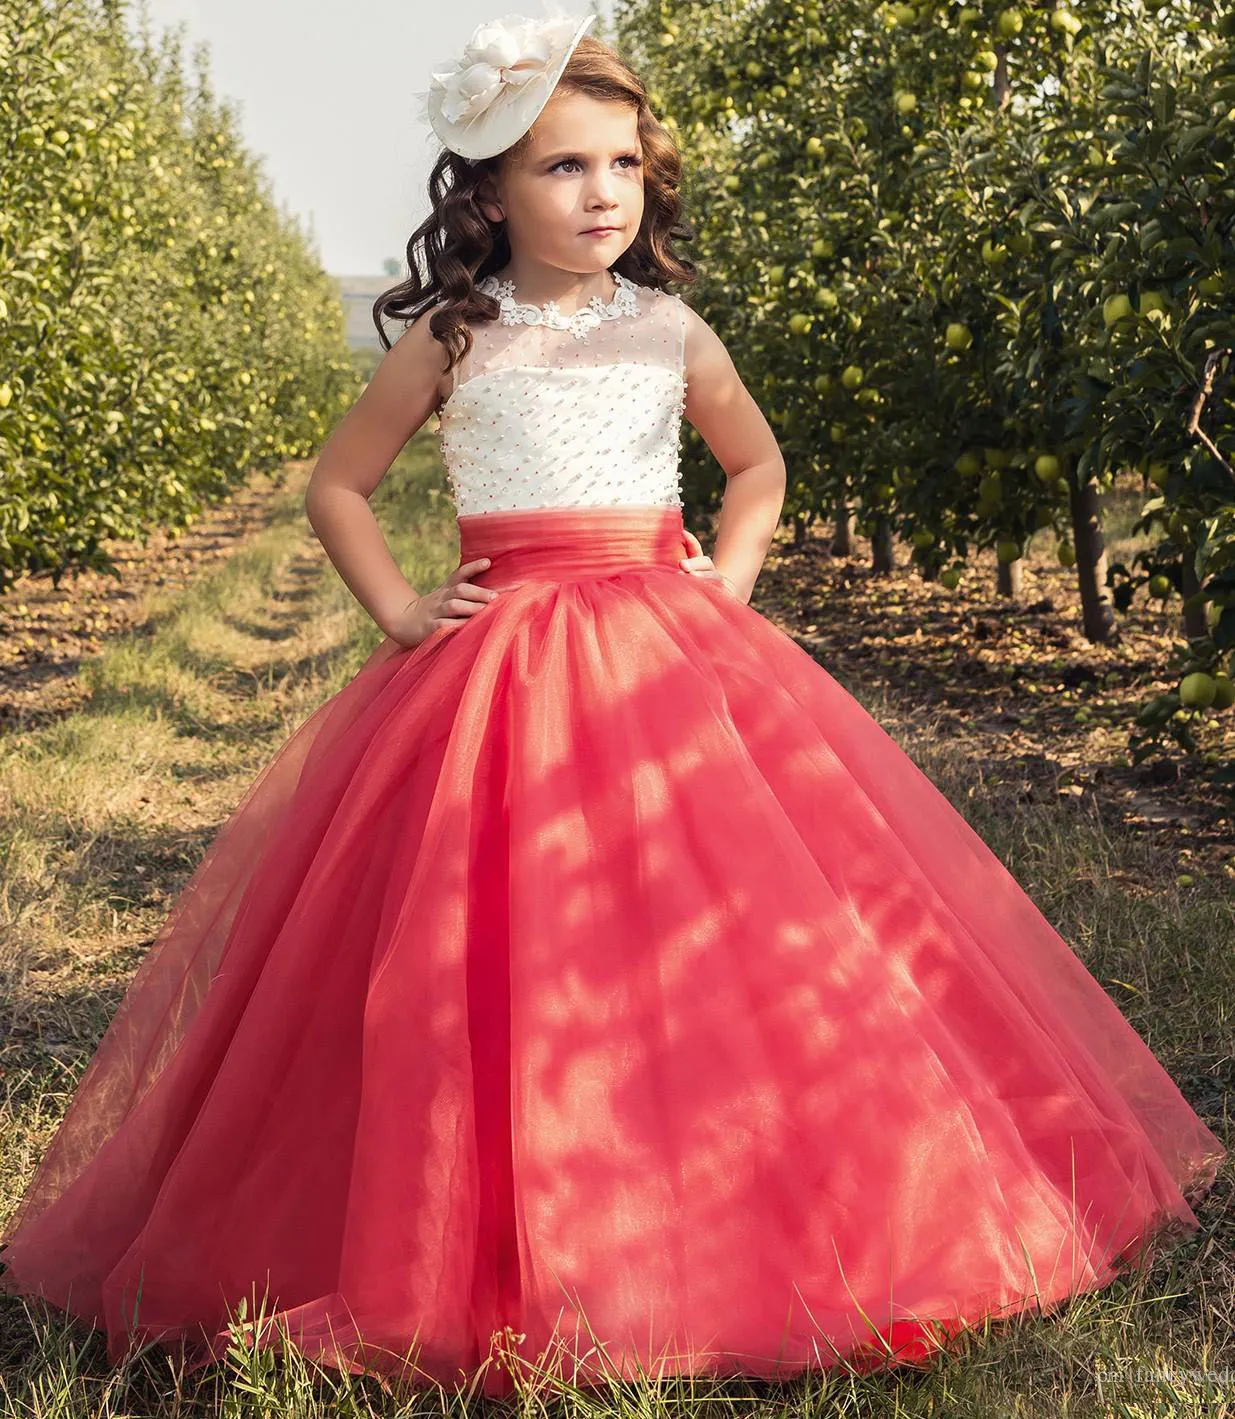 2020 Cheap Flower Girls Dresses For Weddings Lace Appliques Beaded Coral Champagne Tulle Birthday Dress Children Party Kids Girl Ball Gowns